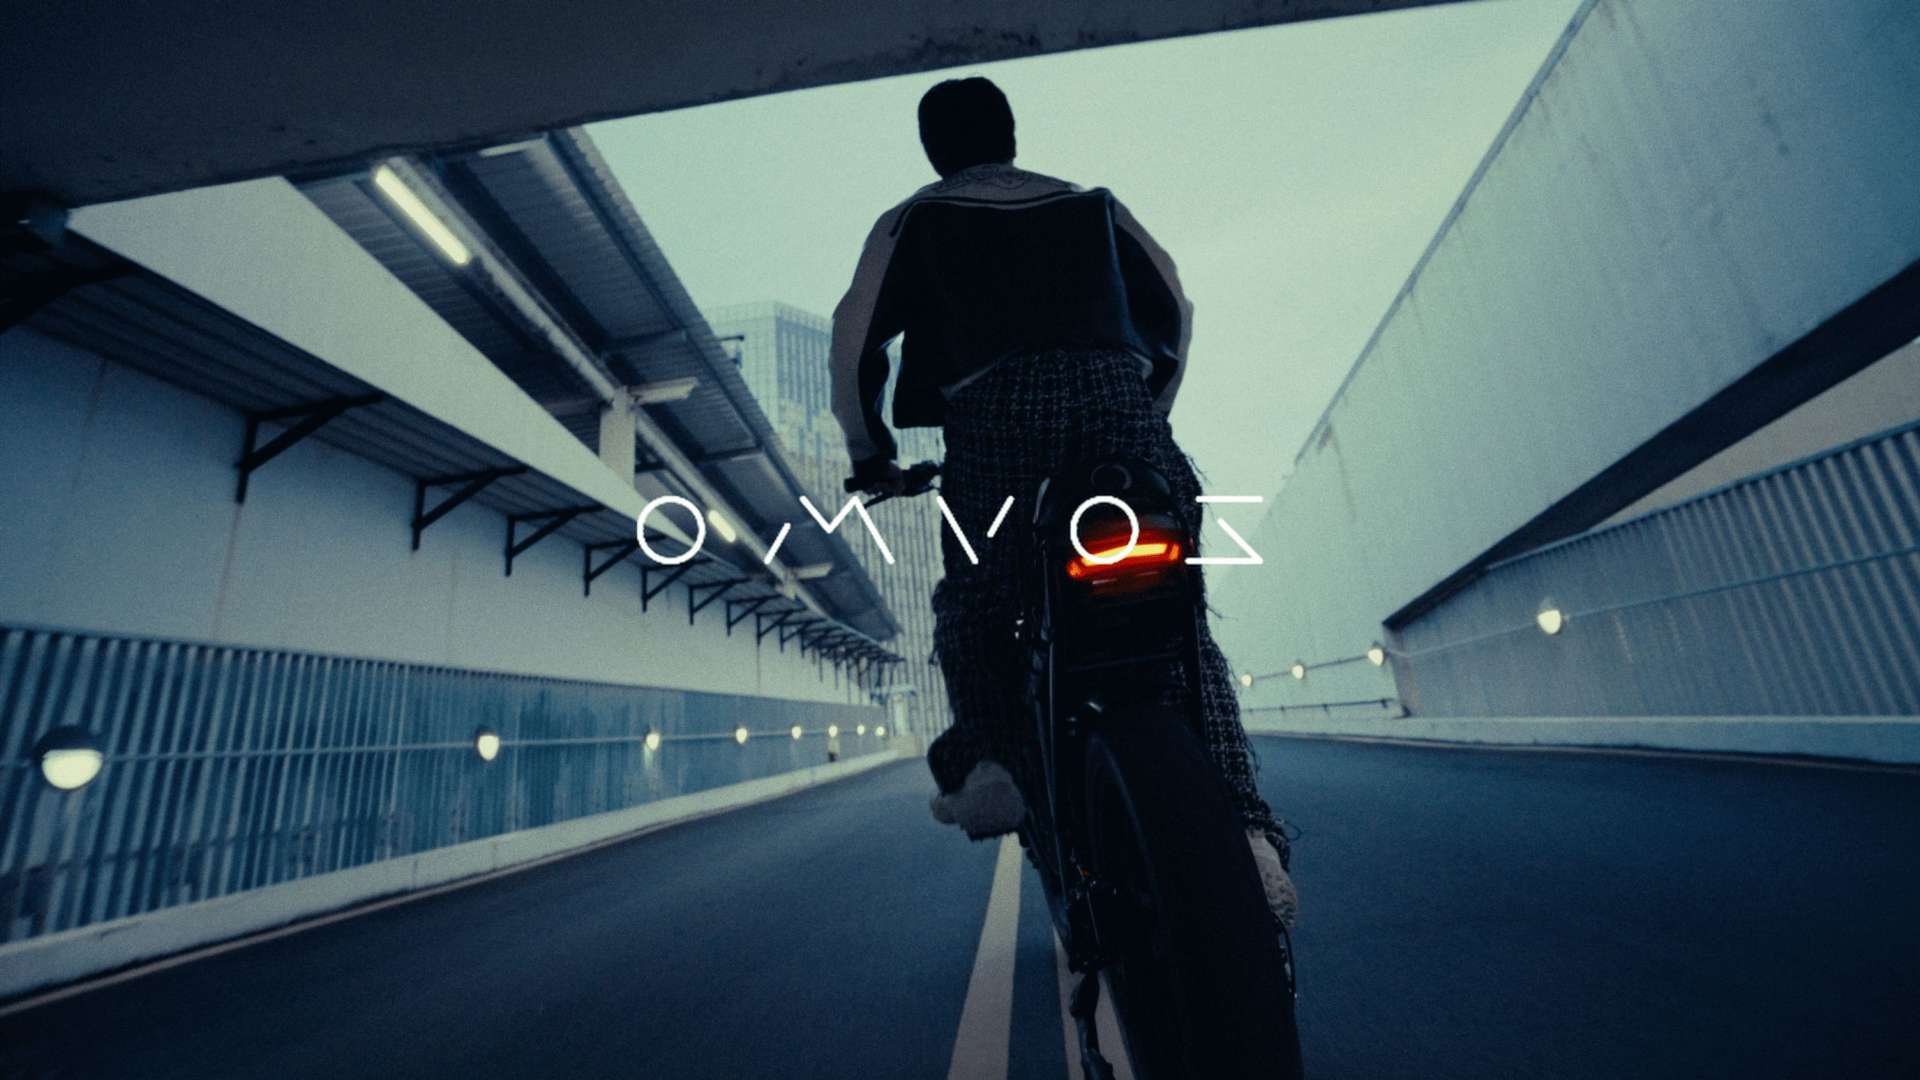 OMVOS-”To Live Is To Explore”